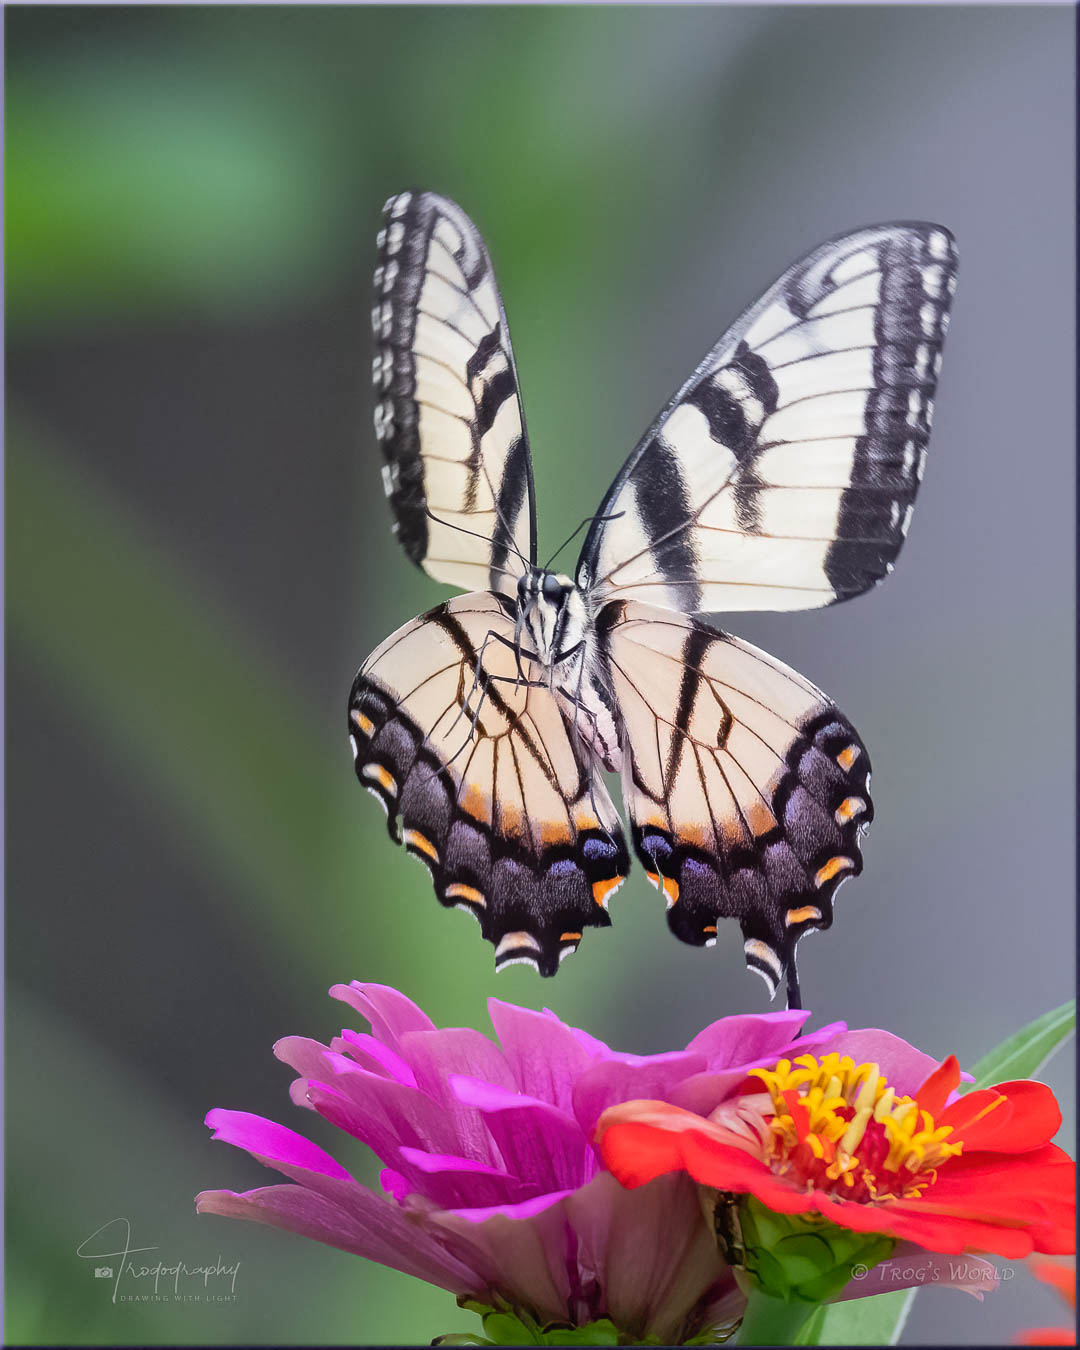 Female Eastern Tiger Swallowtail above the flowers